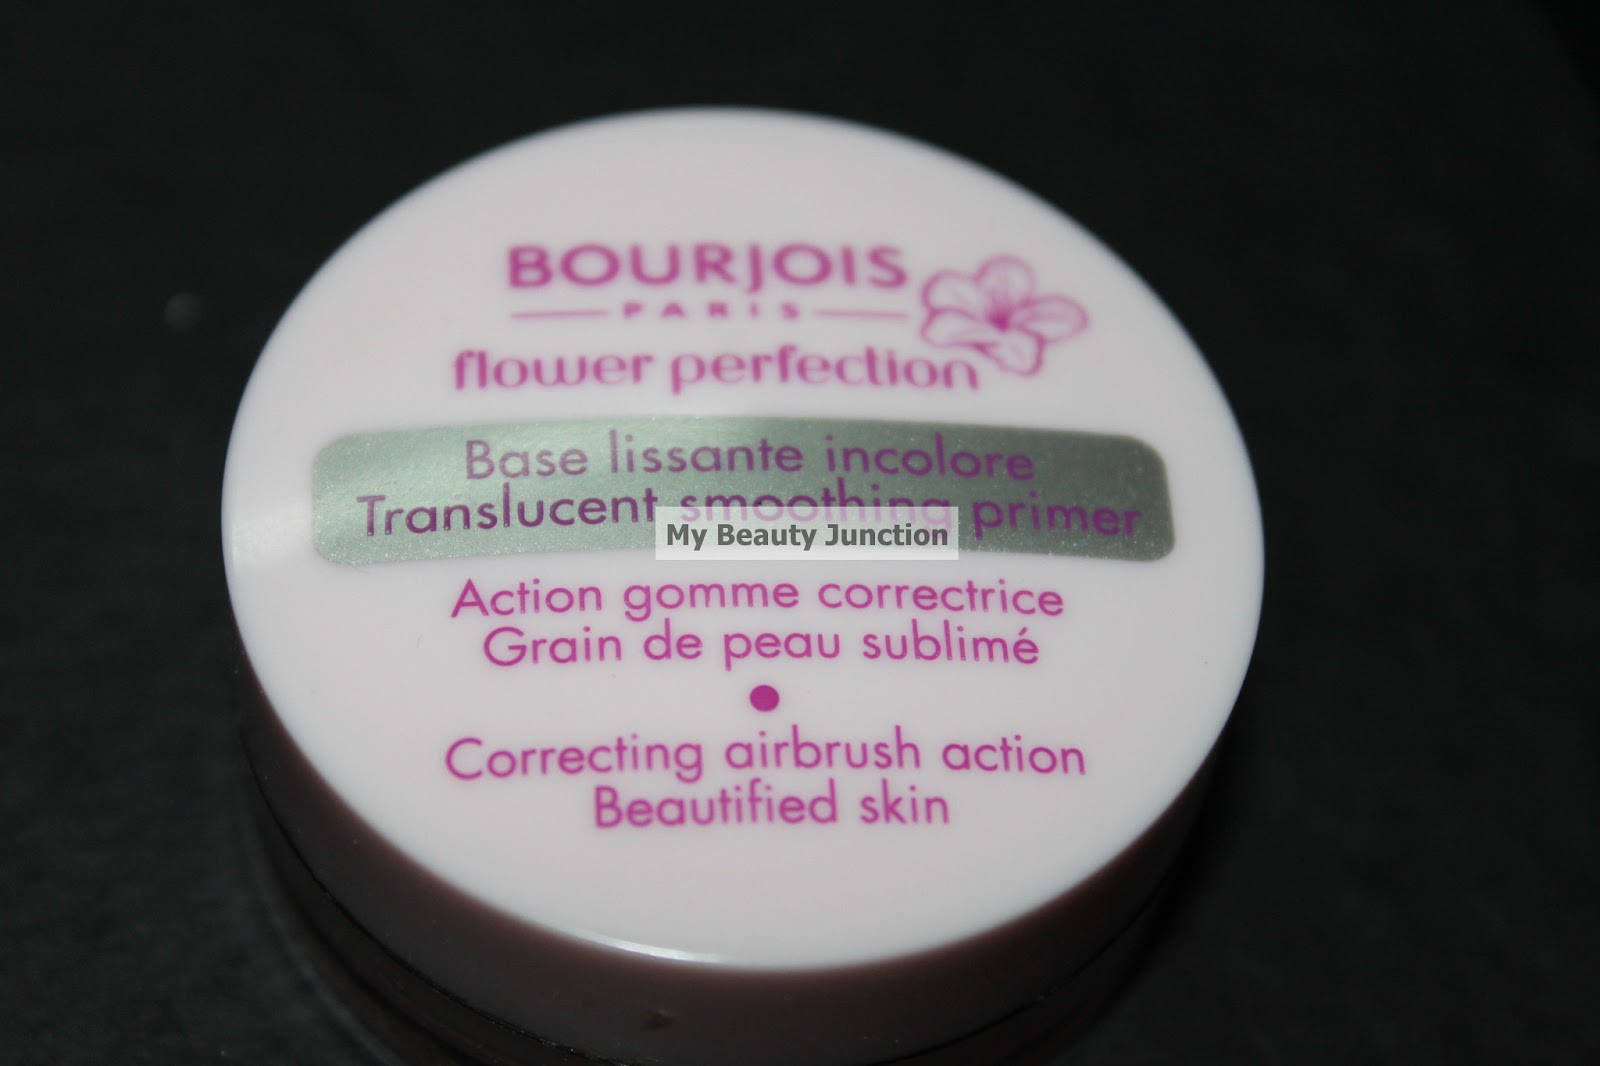 Review of Bourjois Flower Perfection Primer